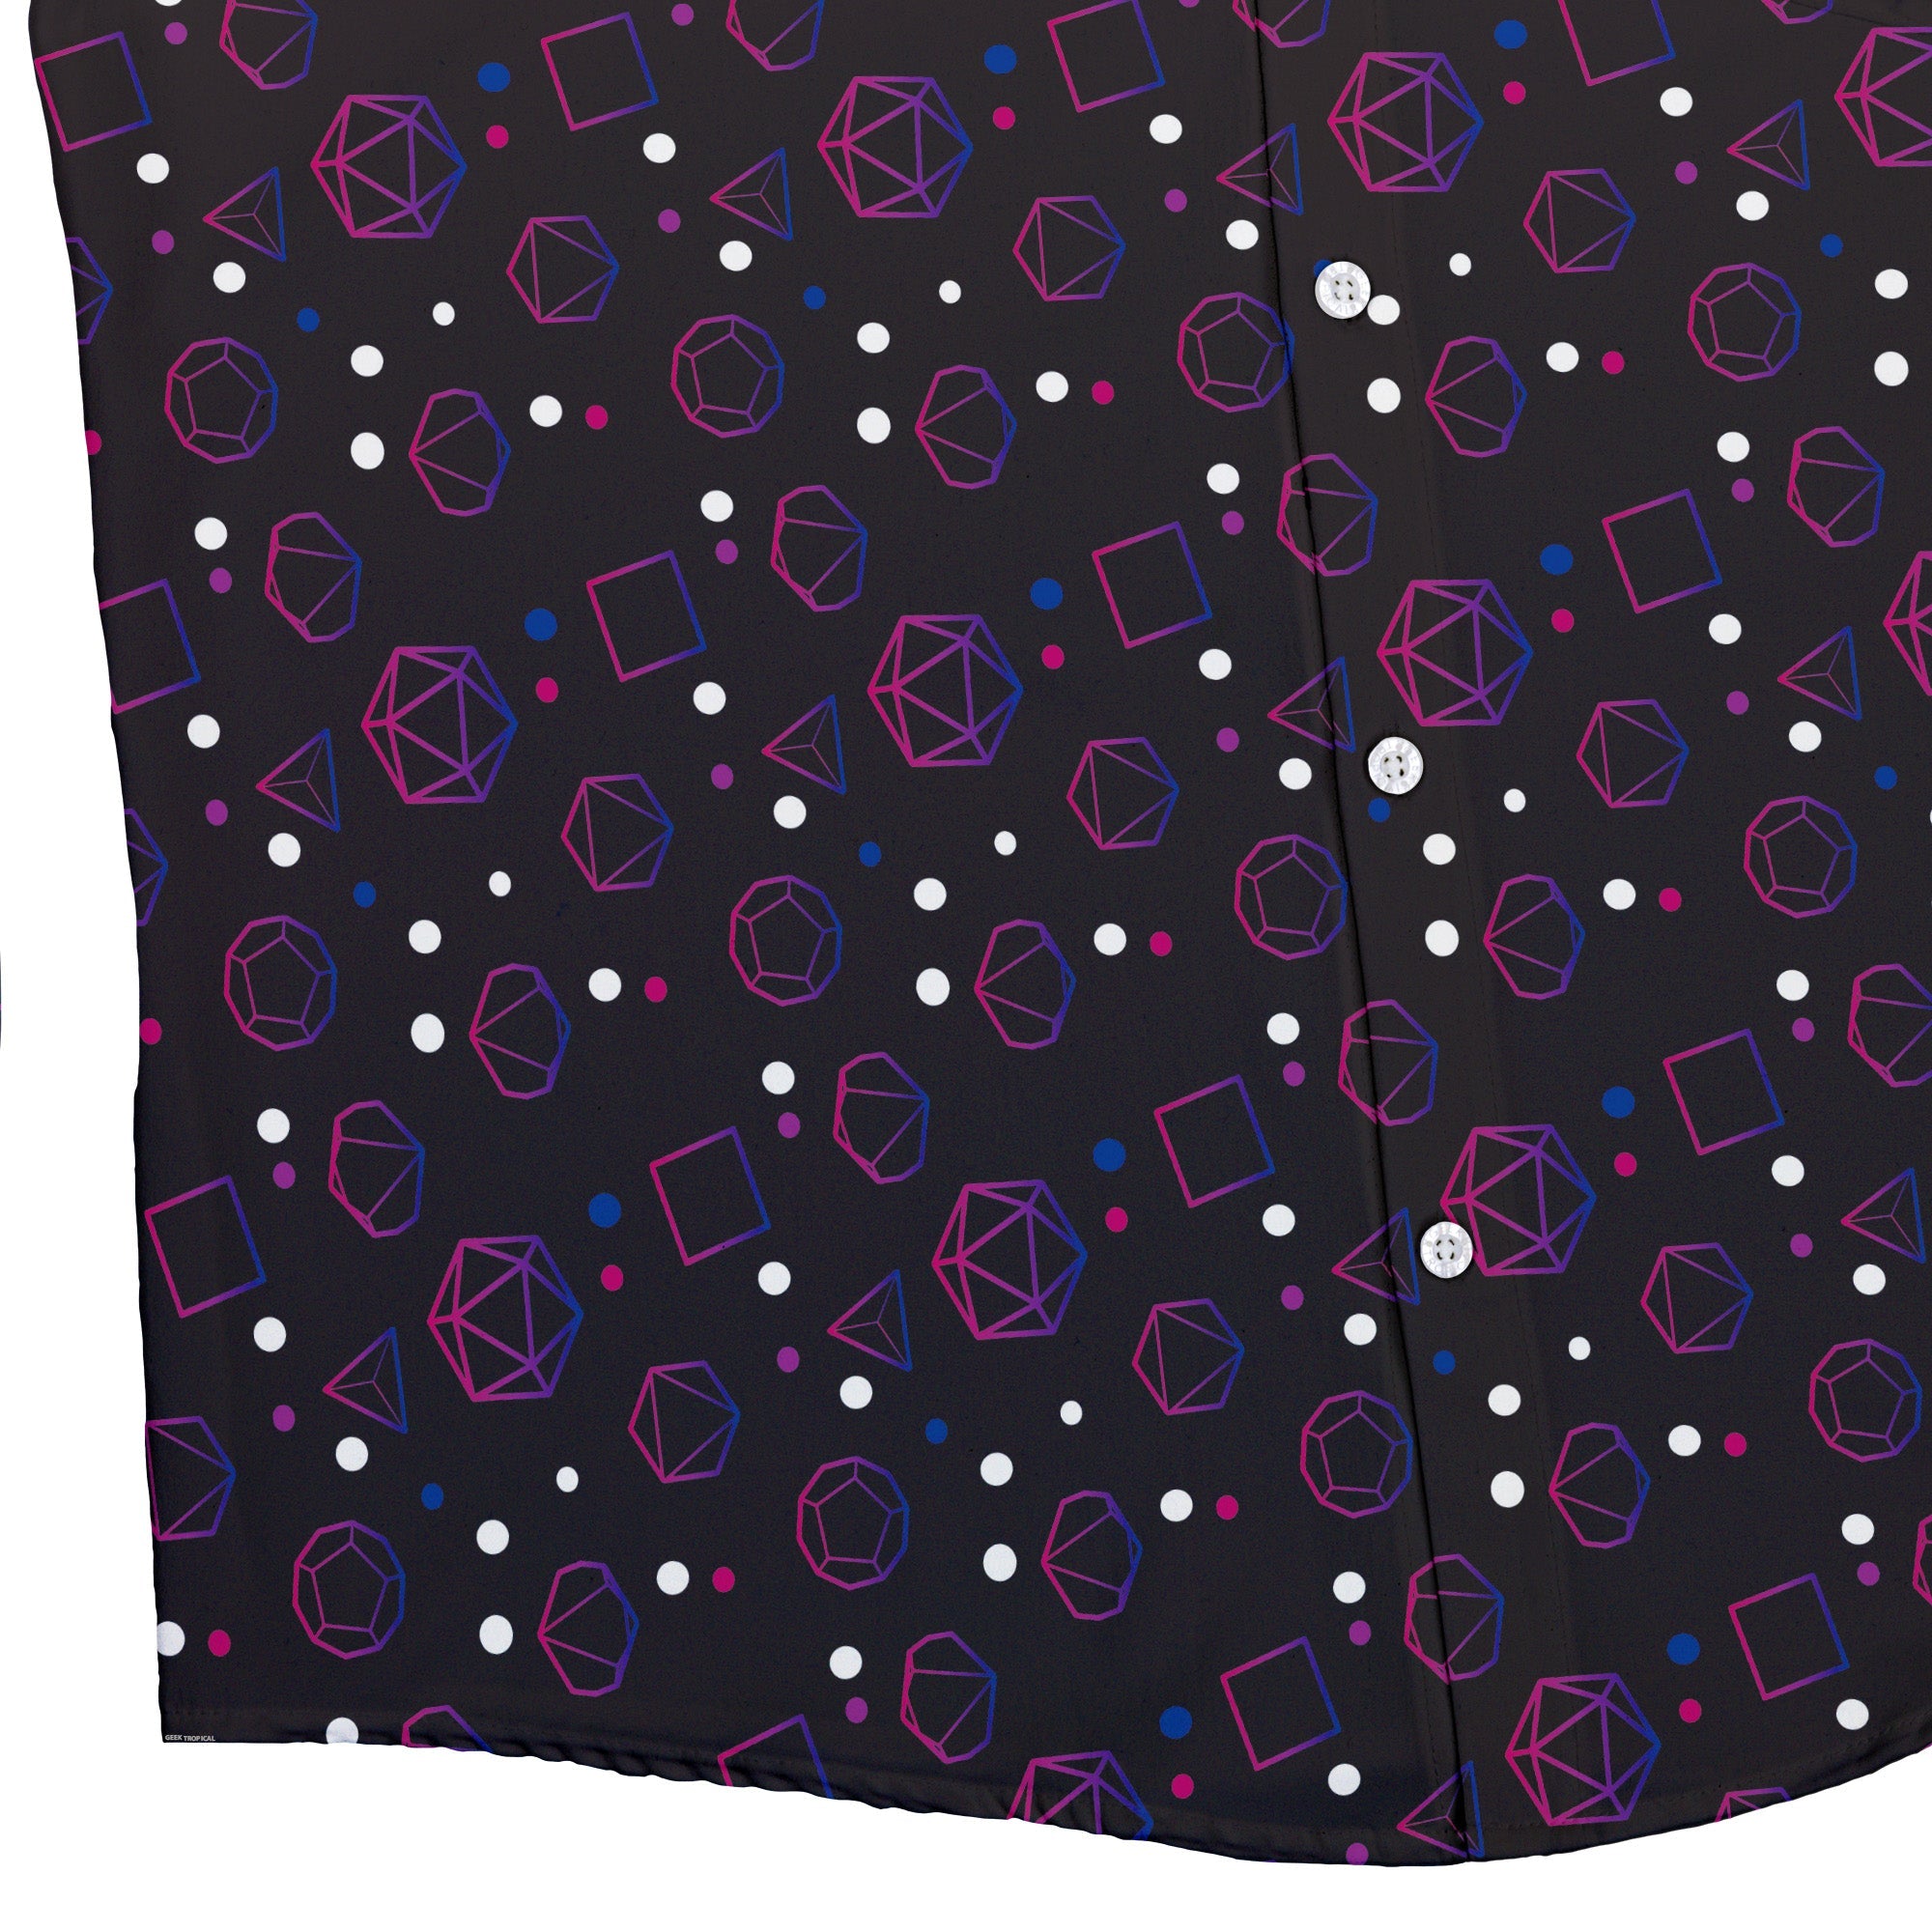 Bisexual Pride Flag DND Dice Button Up Shirt - adult sizing - Design by Heather Davenport - dnd & rpg print